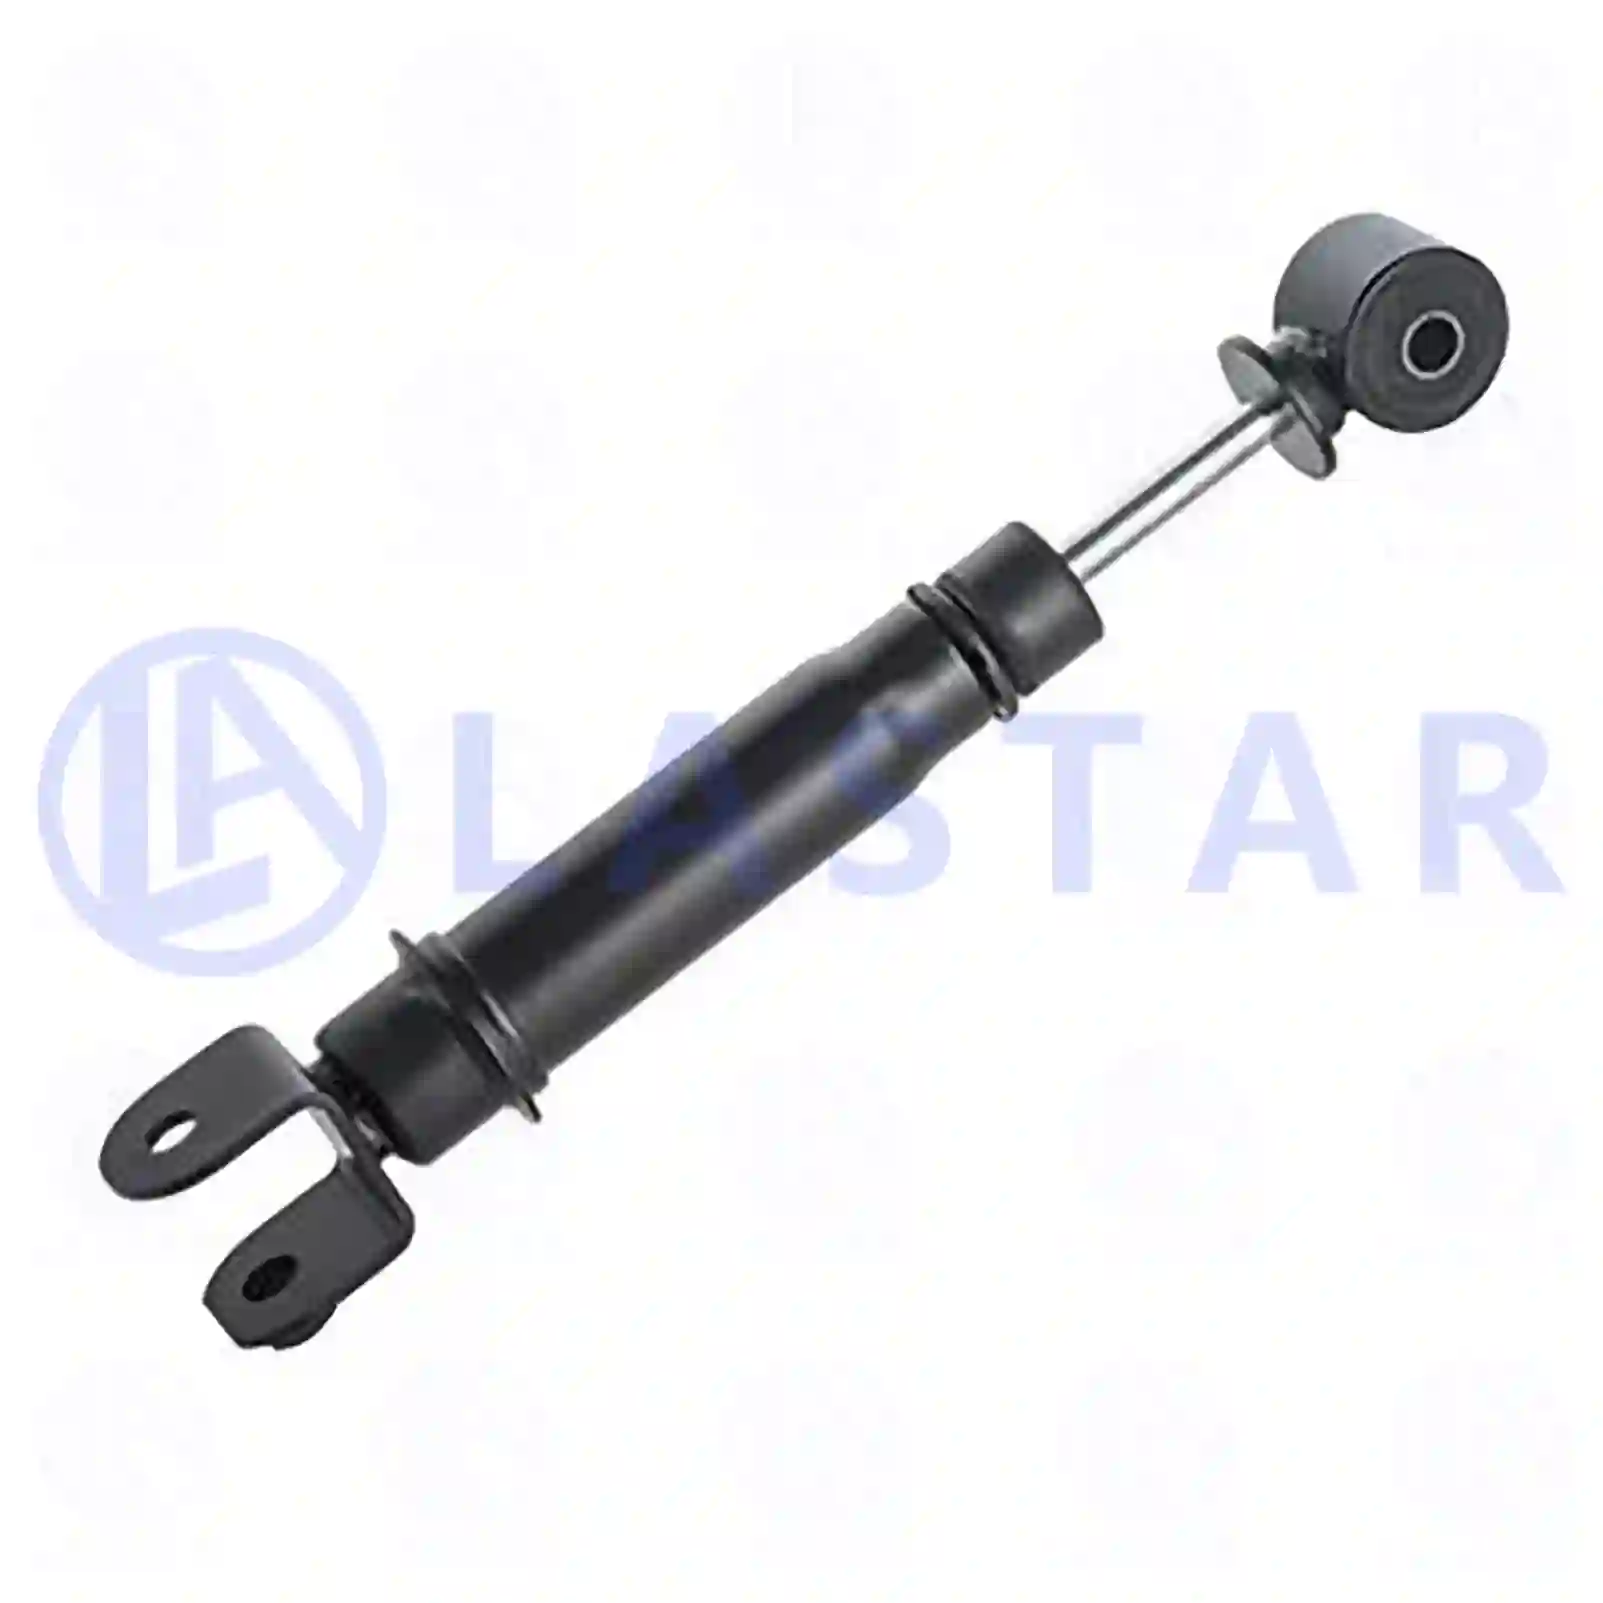 Cabin shock absorber, with bushing, 77735819, , , , , , , ||  77735819 Lastar Spare Part | Truck Spare Parts, Auotomotive Spare Parts Cabin shock absorber, with bushing, 77735819, , , , , , , ||  77735819 Lastar Spare Part | Truck Spare Parts, Auotomotive Spare Parts